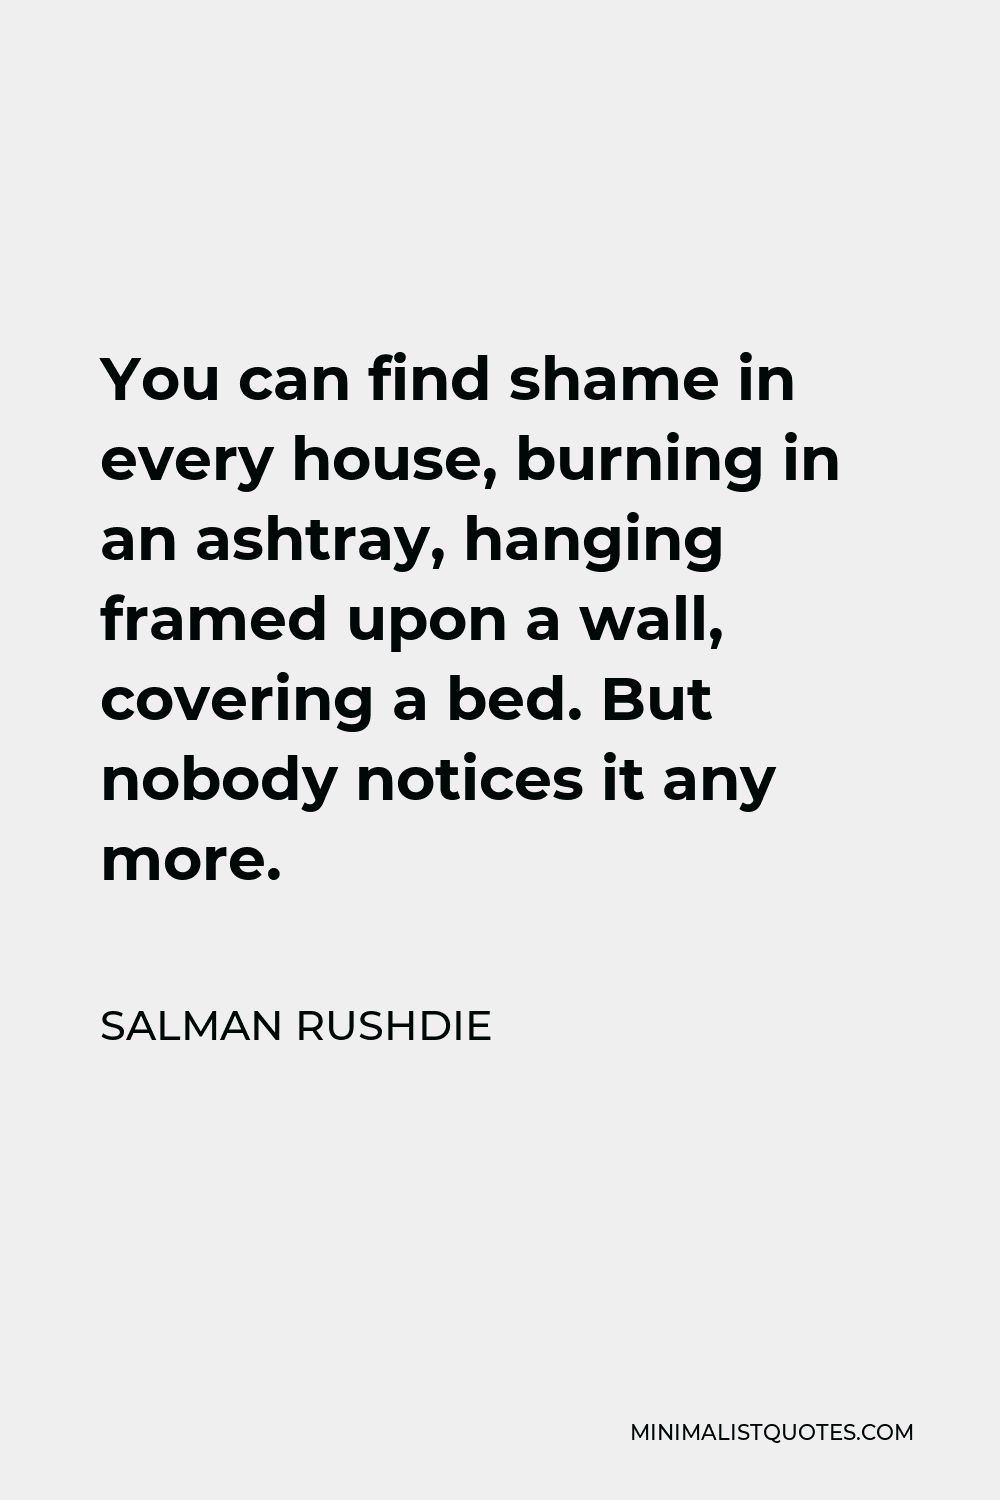 Salman Rushdie Quote - You can find shame in every house, burning in an ashtray, hanging framed upon a wall, covering a bed. But nobody notices it any more.